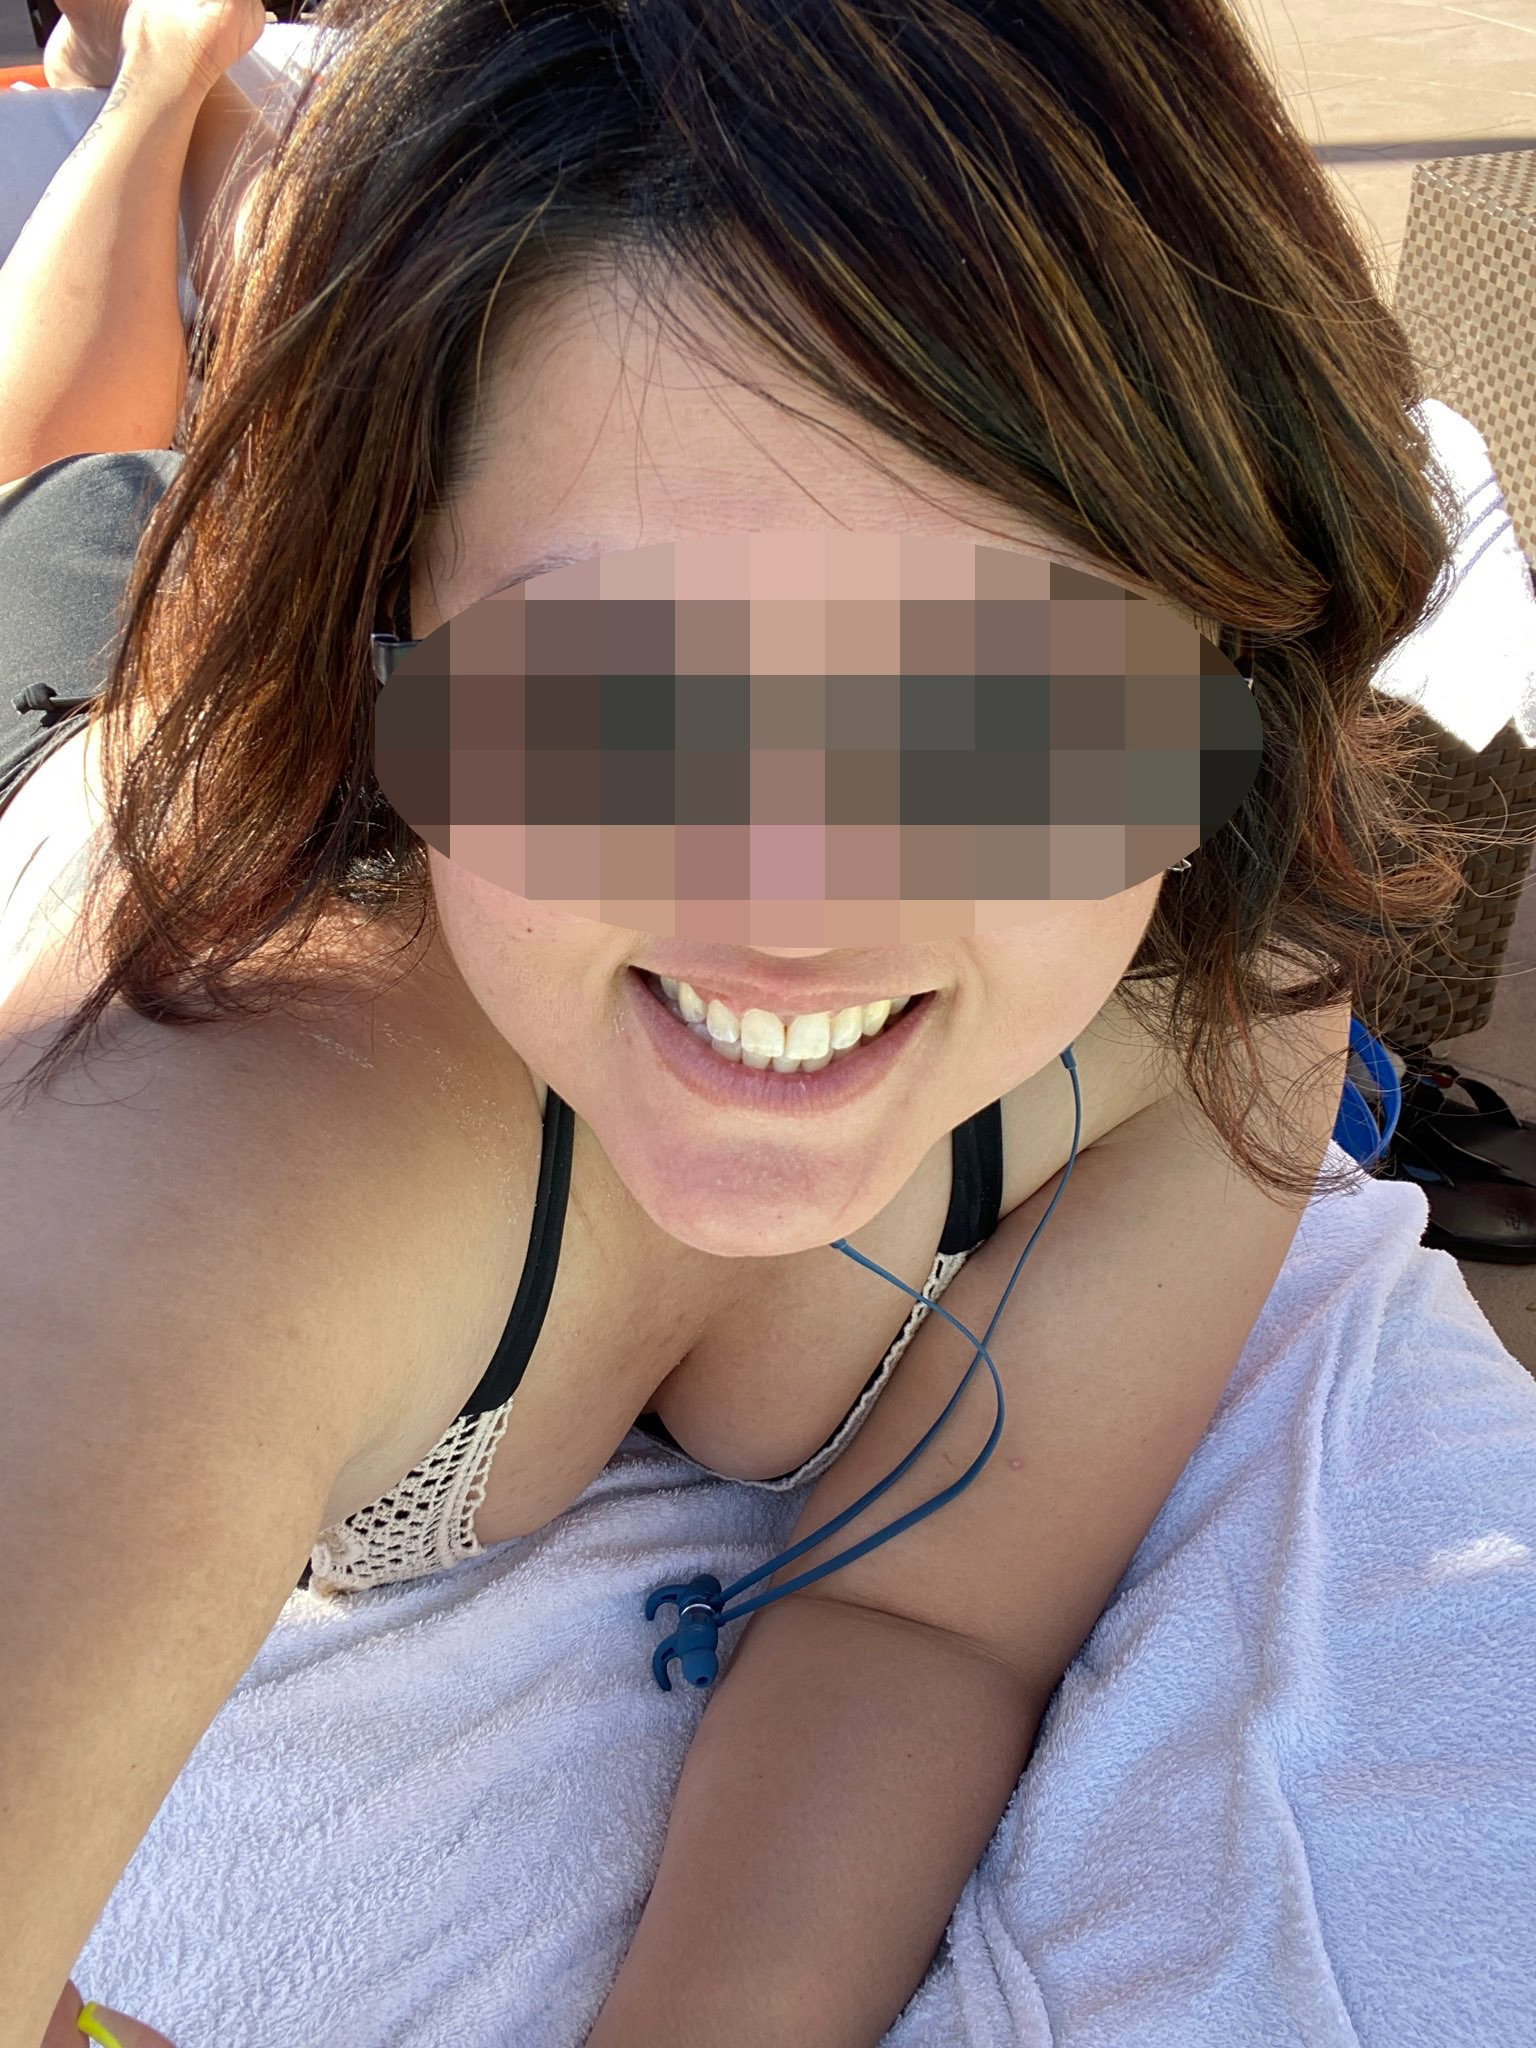 Watch the Photo by HotwifeHusband with the username @psionyx, who is a star user, posted on November 4, 2019. The post is about the topic Share your sexy wife. and the text says 'A hot selfie of the wife from our vacation, If you want to see our exclusive uncensored content visit our Onlyfans page
https://onlyfans.com/hotwifehusband'